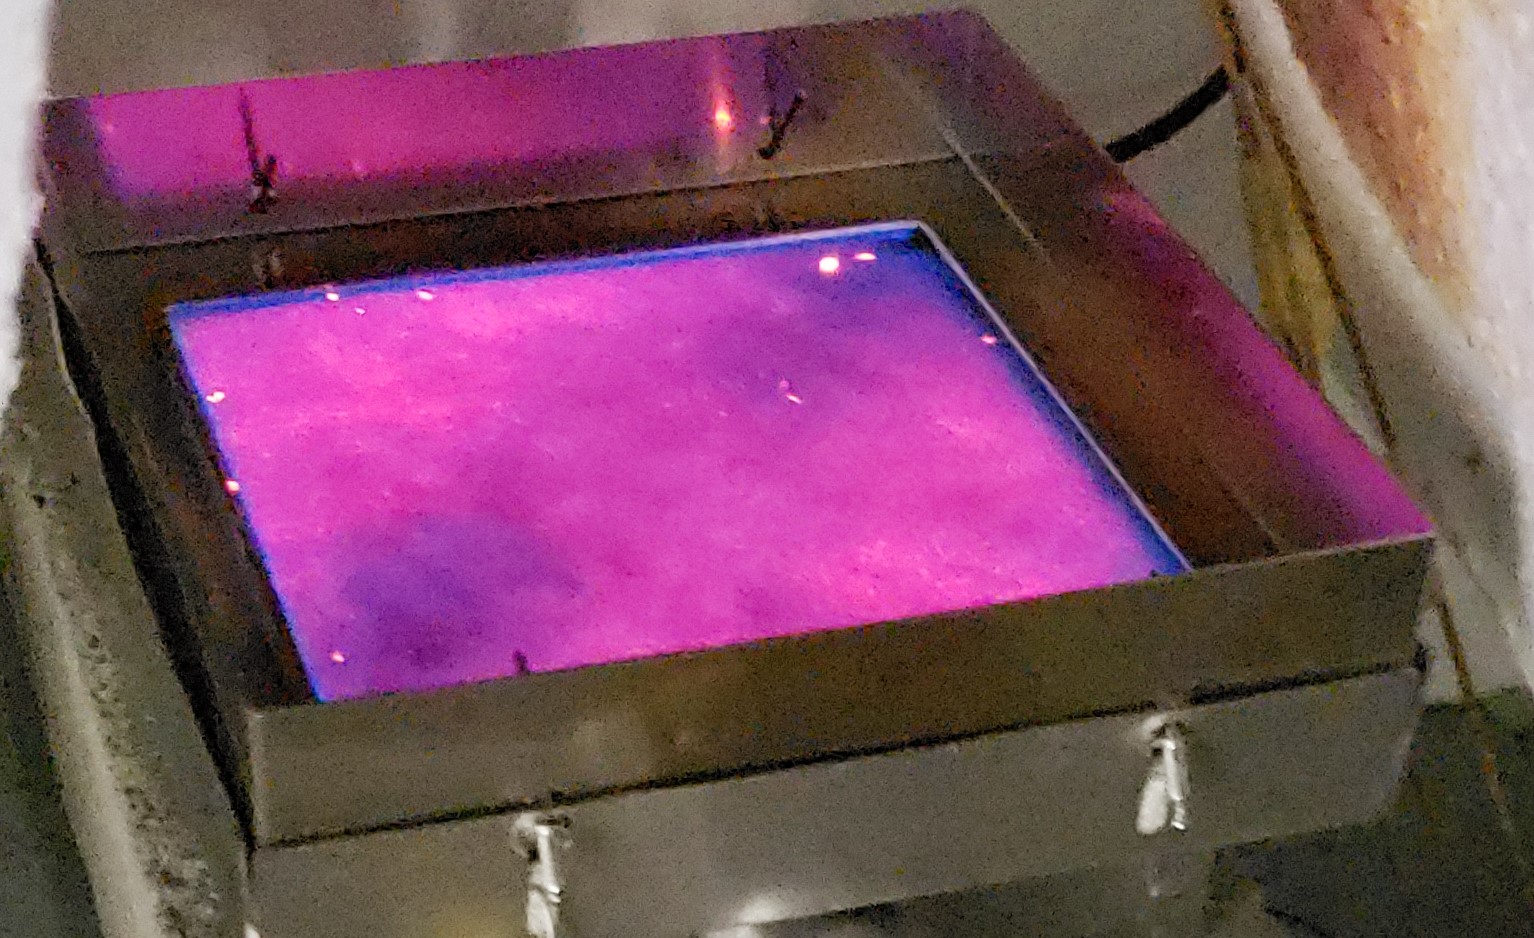 Image of the project's fuel-flexible flameless appliance.